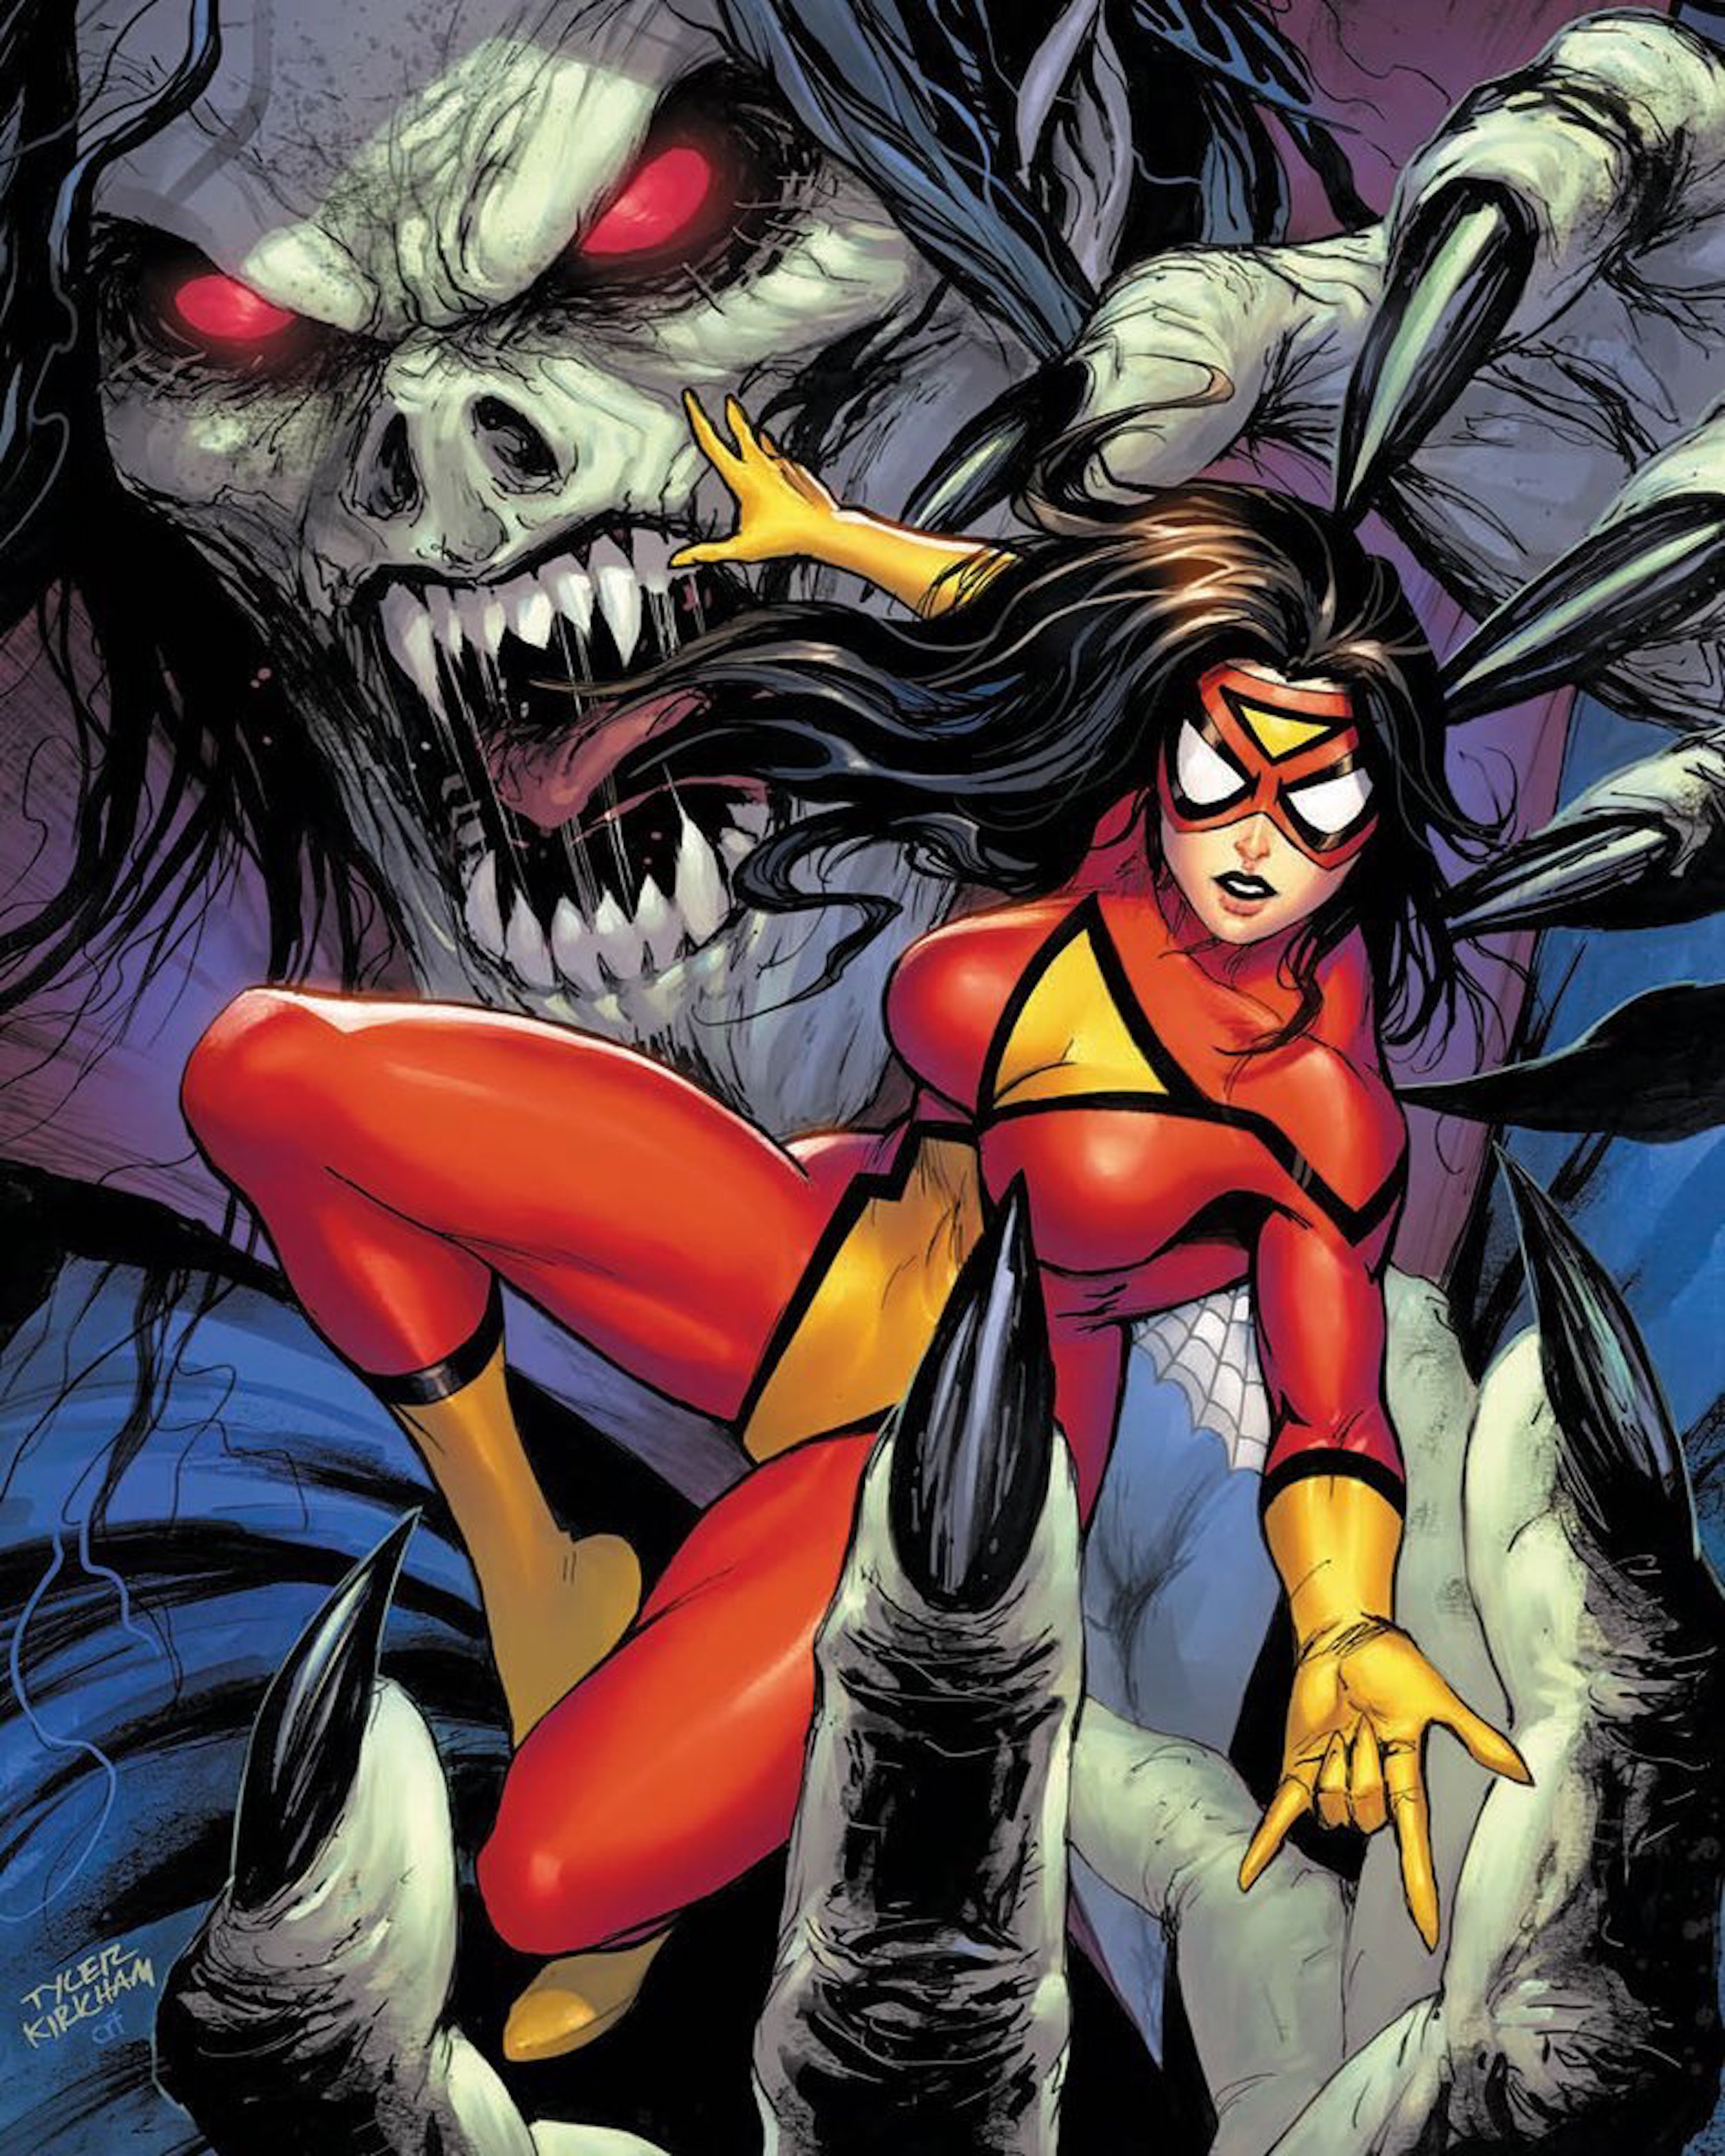 This image shows Spider-Woman in the middle of fighting an enemy. The sexist comic book cover illustration is very revealing and overly sexualizes the character.